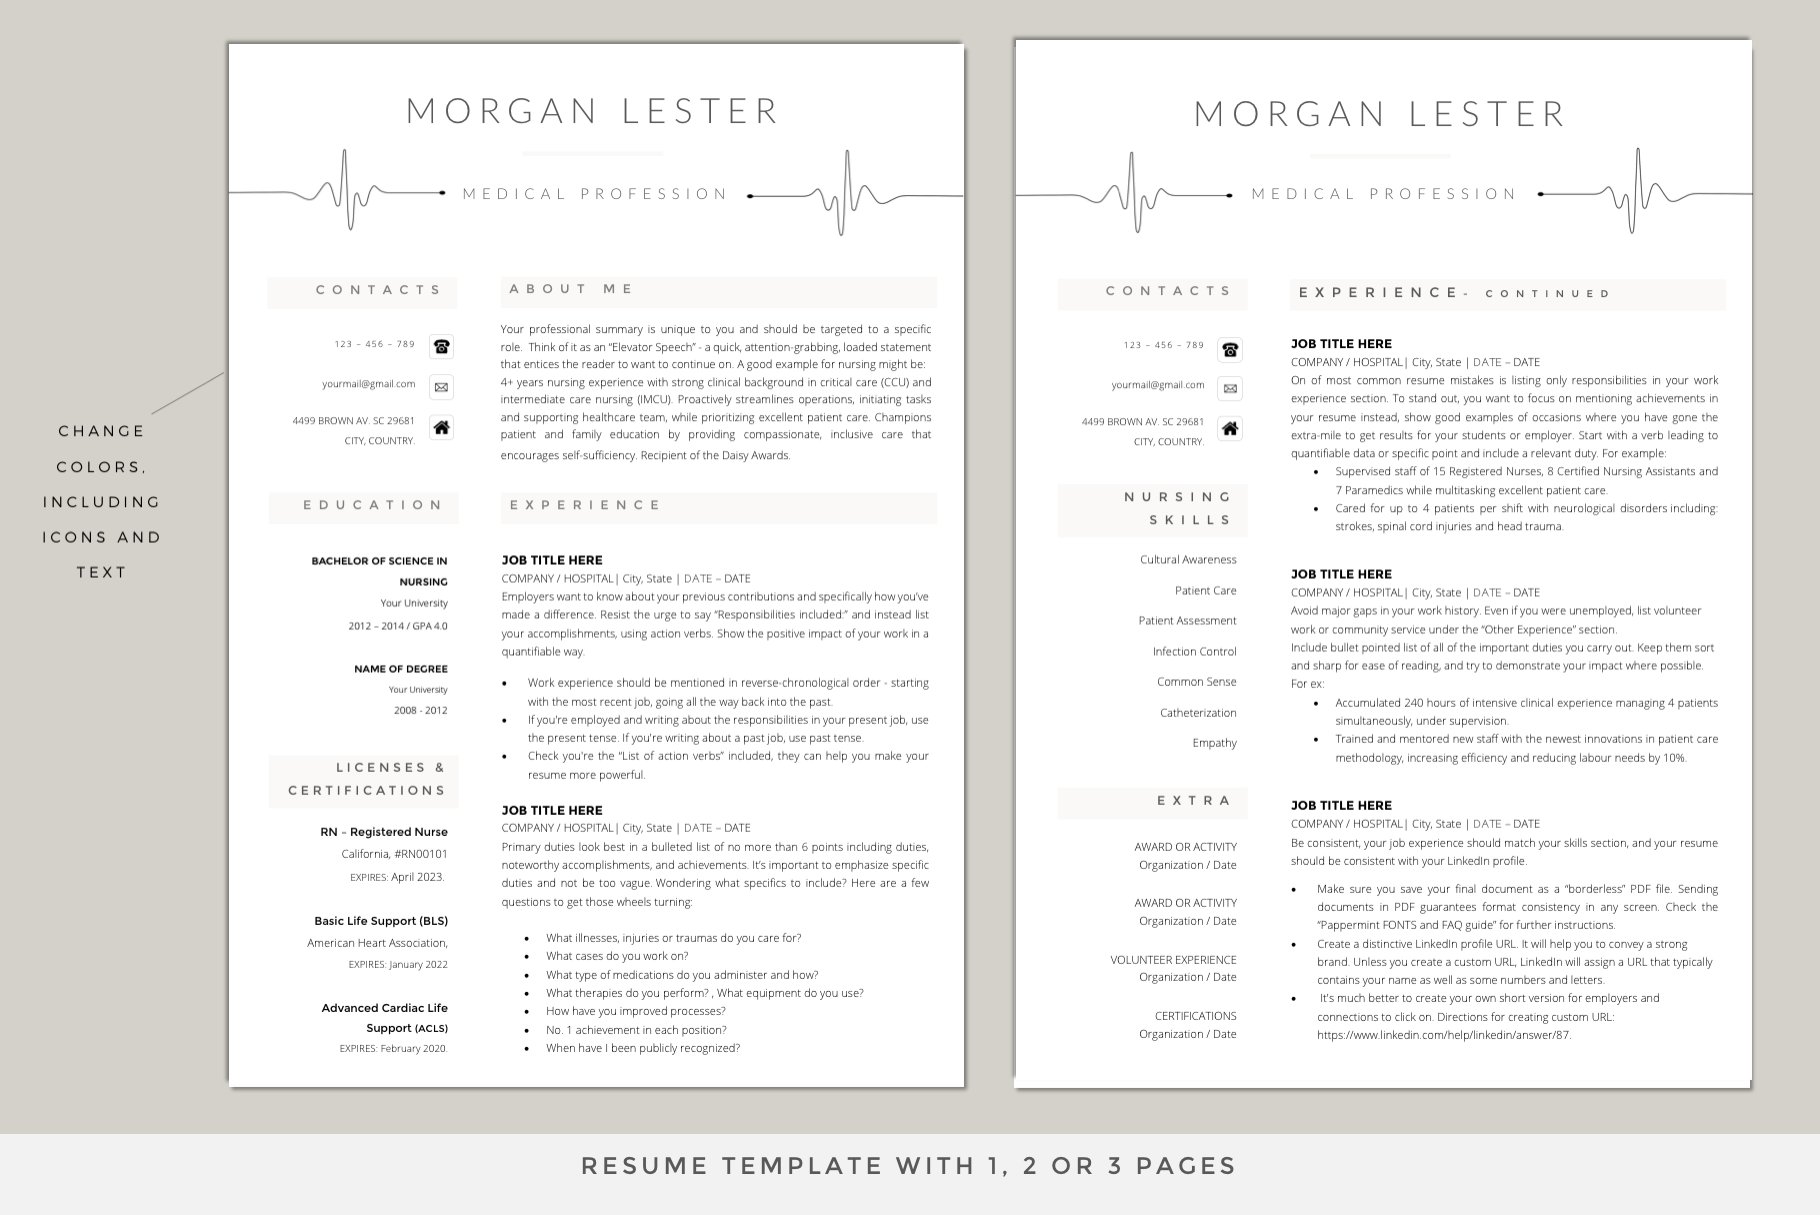 Professional resume template for medical professionals.